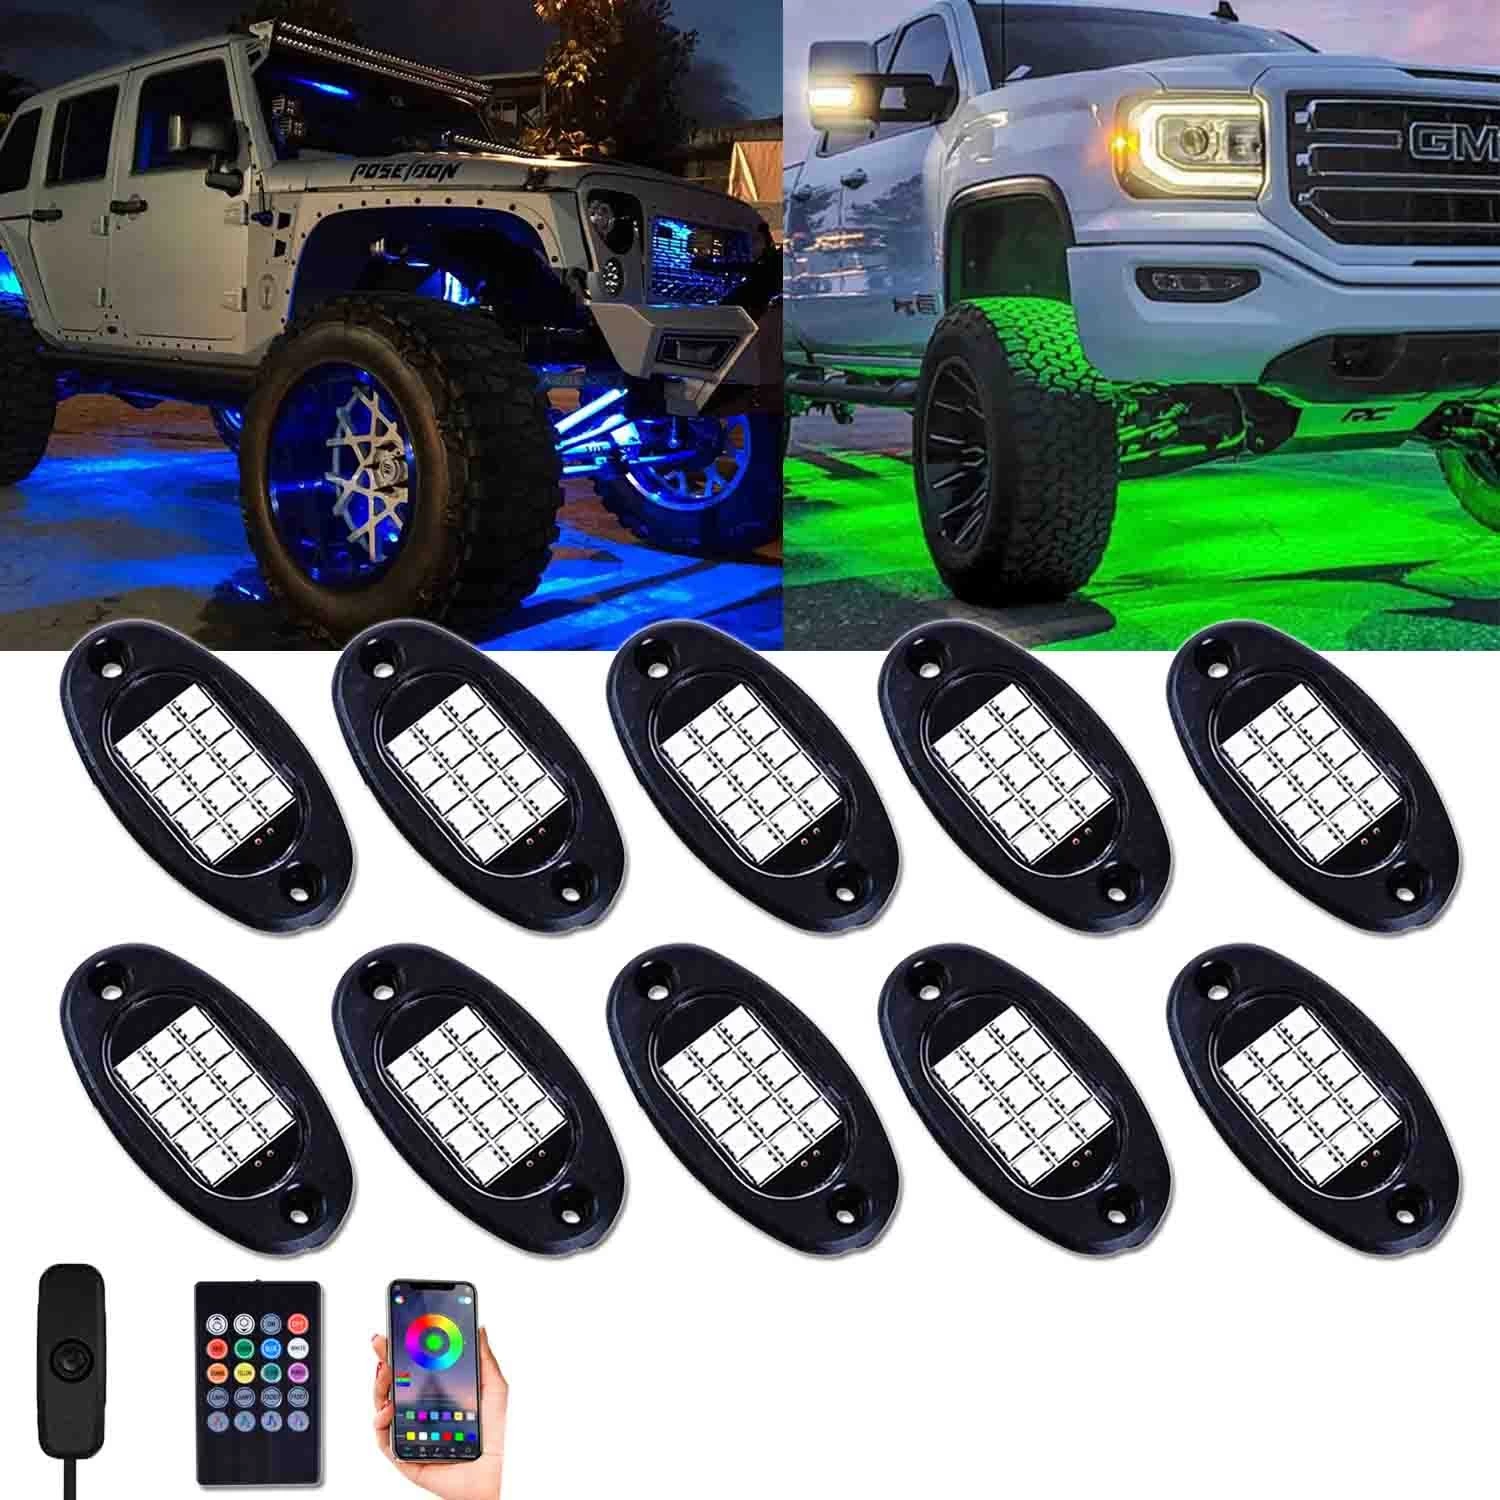 China Unionlux RGB LED Rock Lights 60 LEDs Multicolor Underglow Neon Lights Waterproof Aluminum Light Kit with RF/APP Control Music Mode Timing Function for Truck Jeep Off Road Car UTV ATV SUV 8 Packs Hersteller